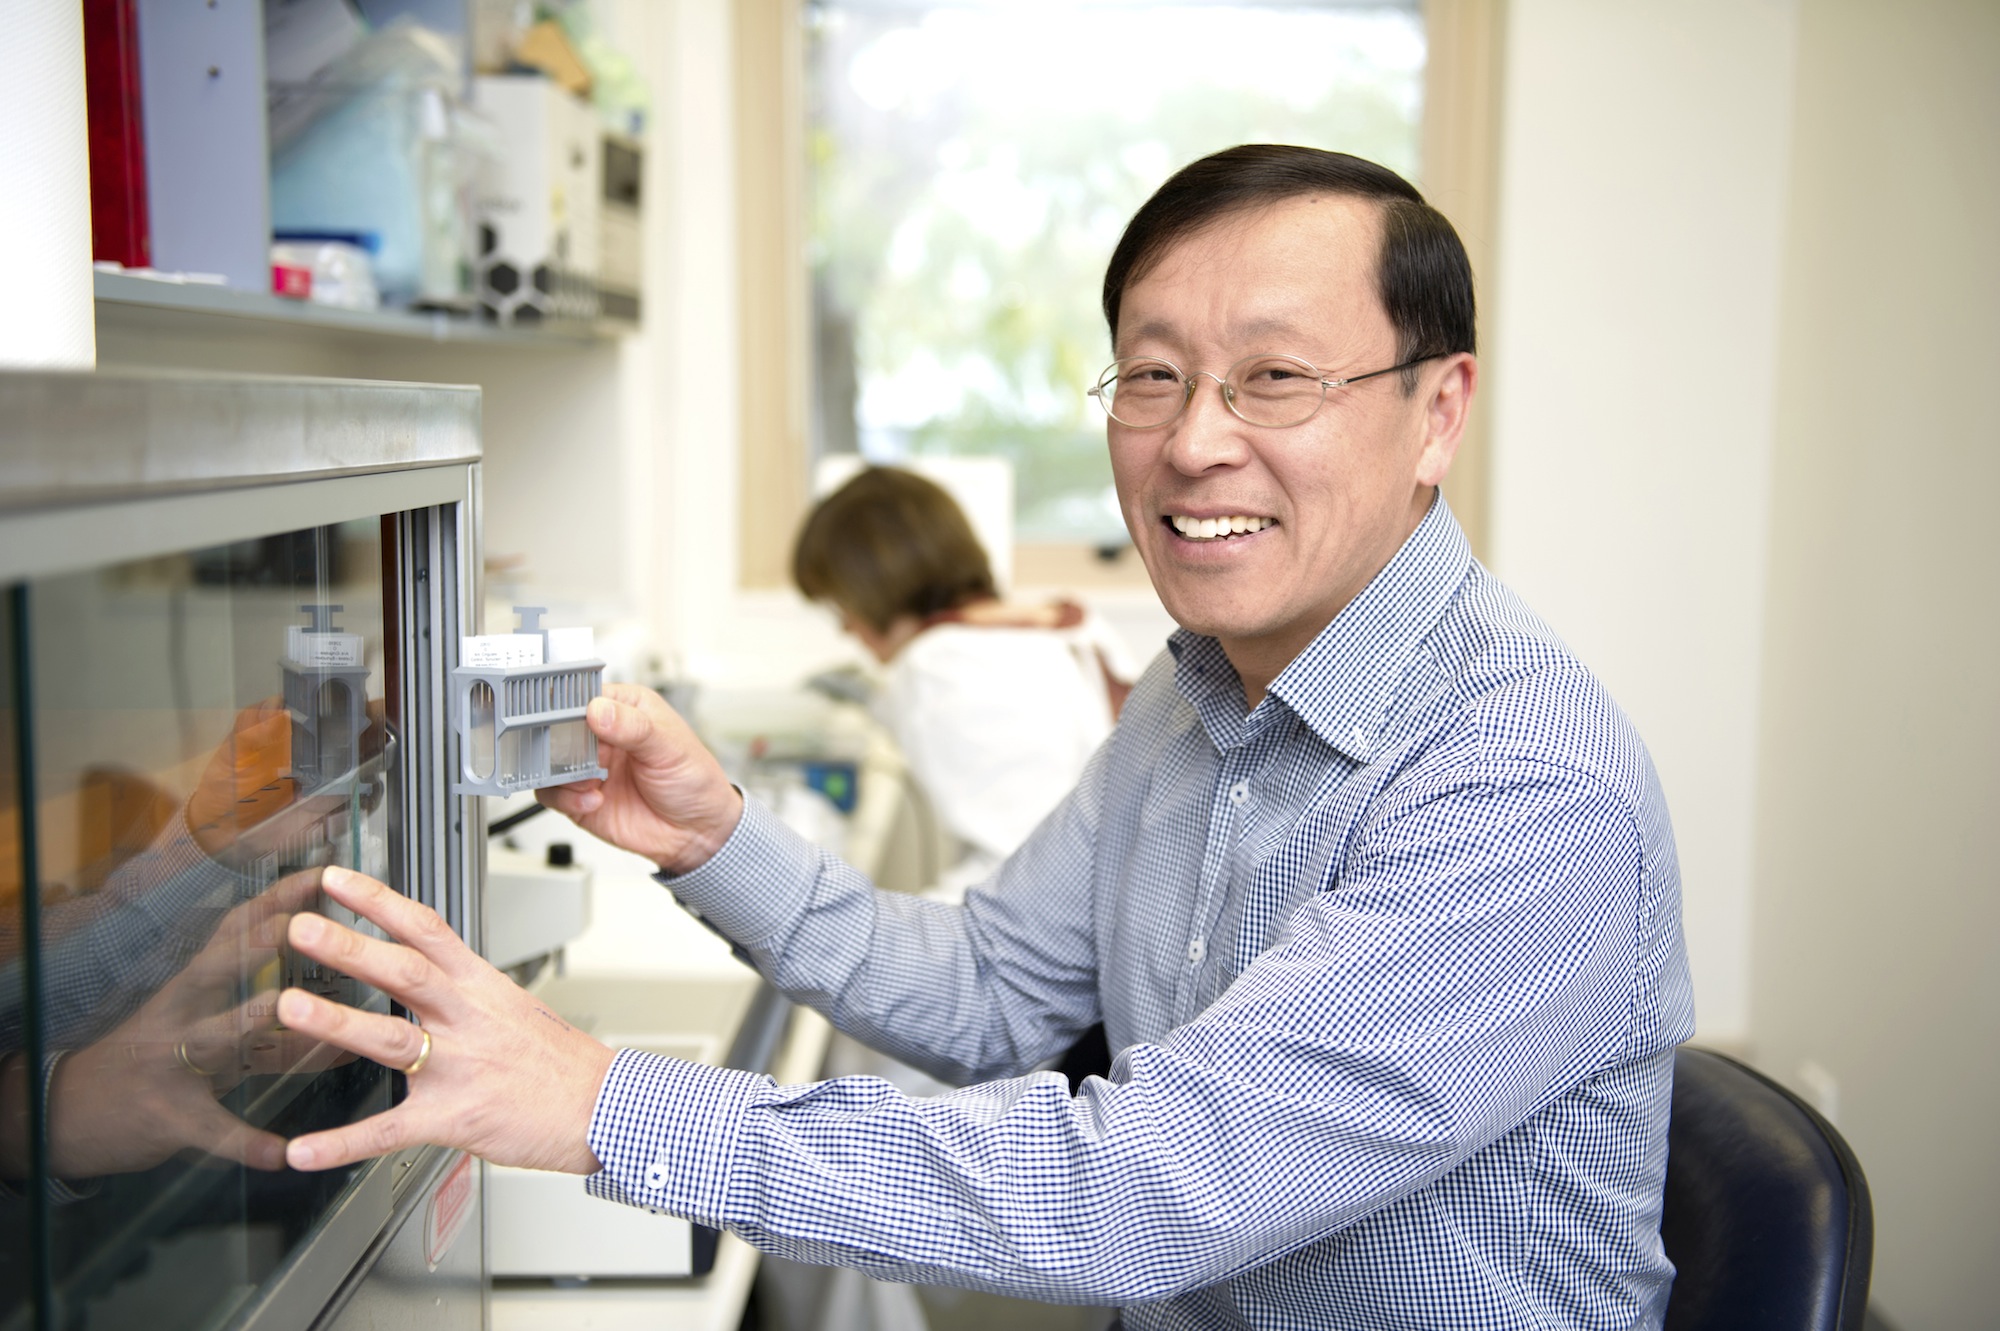 NeuRA's Dr Scott Kim is investigating the role of cholesterol in Alzheimer's disease